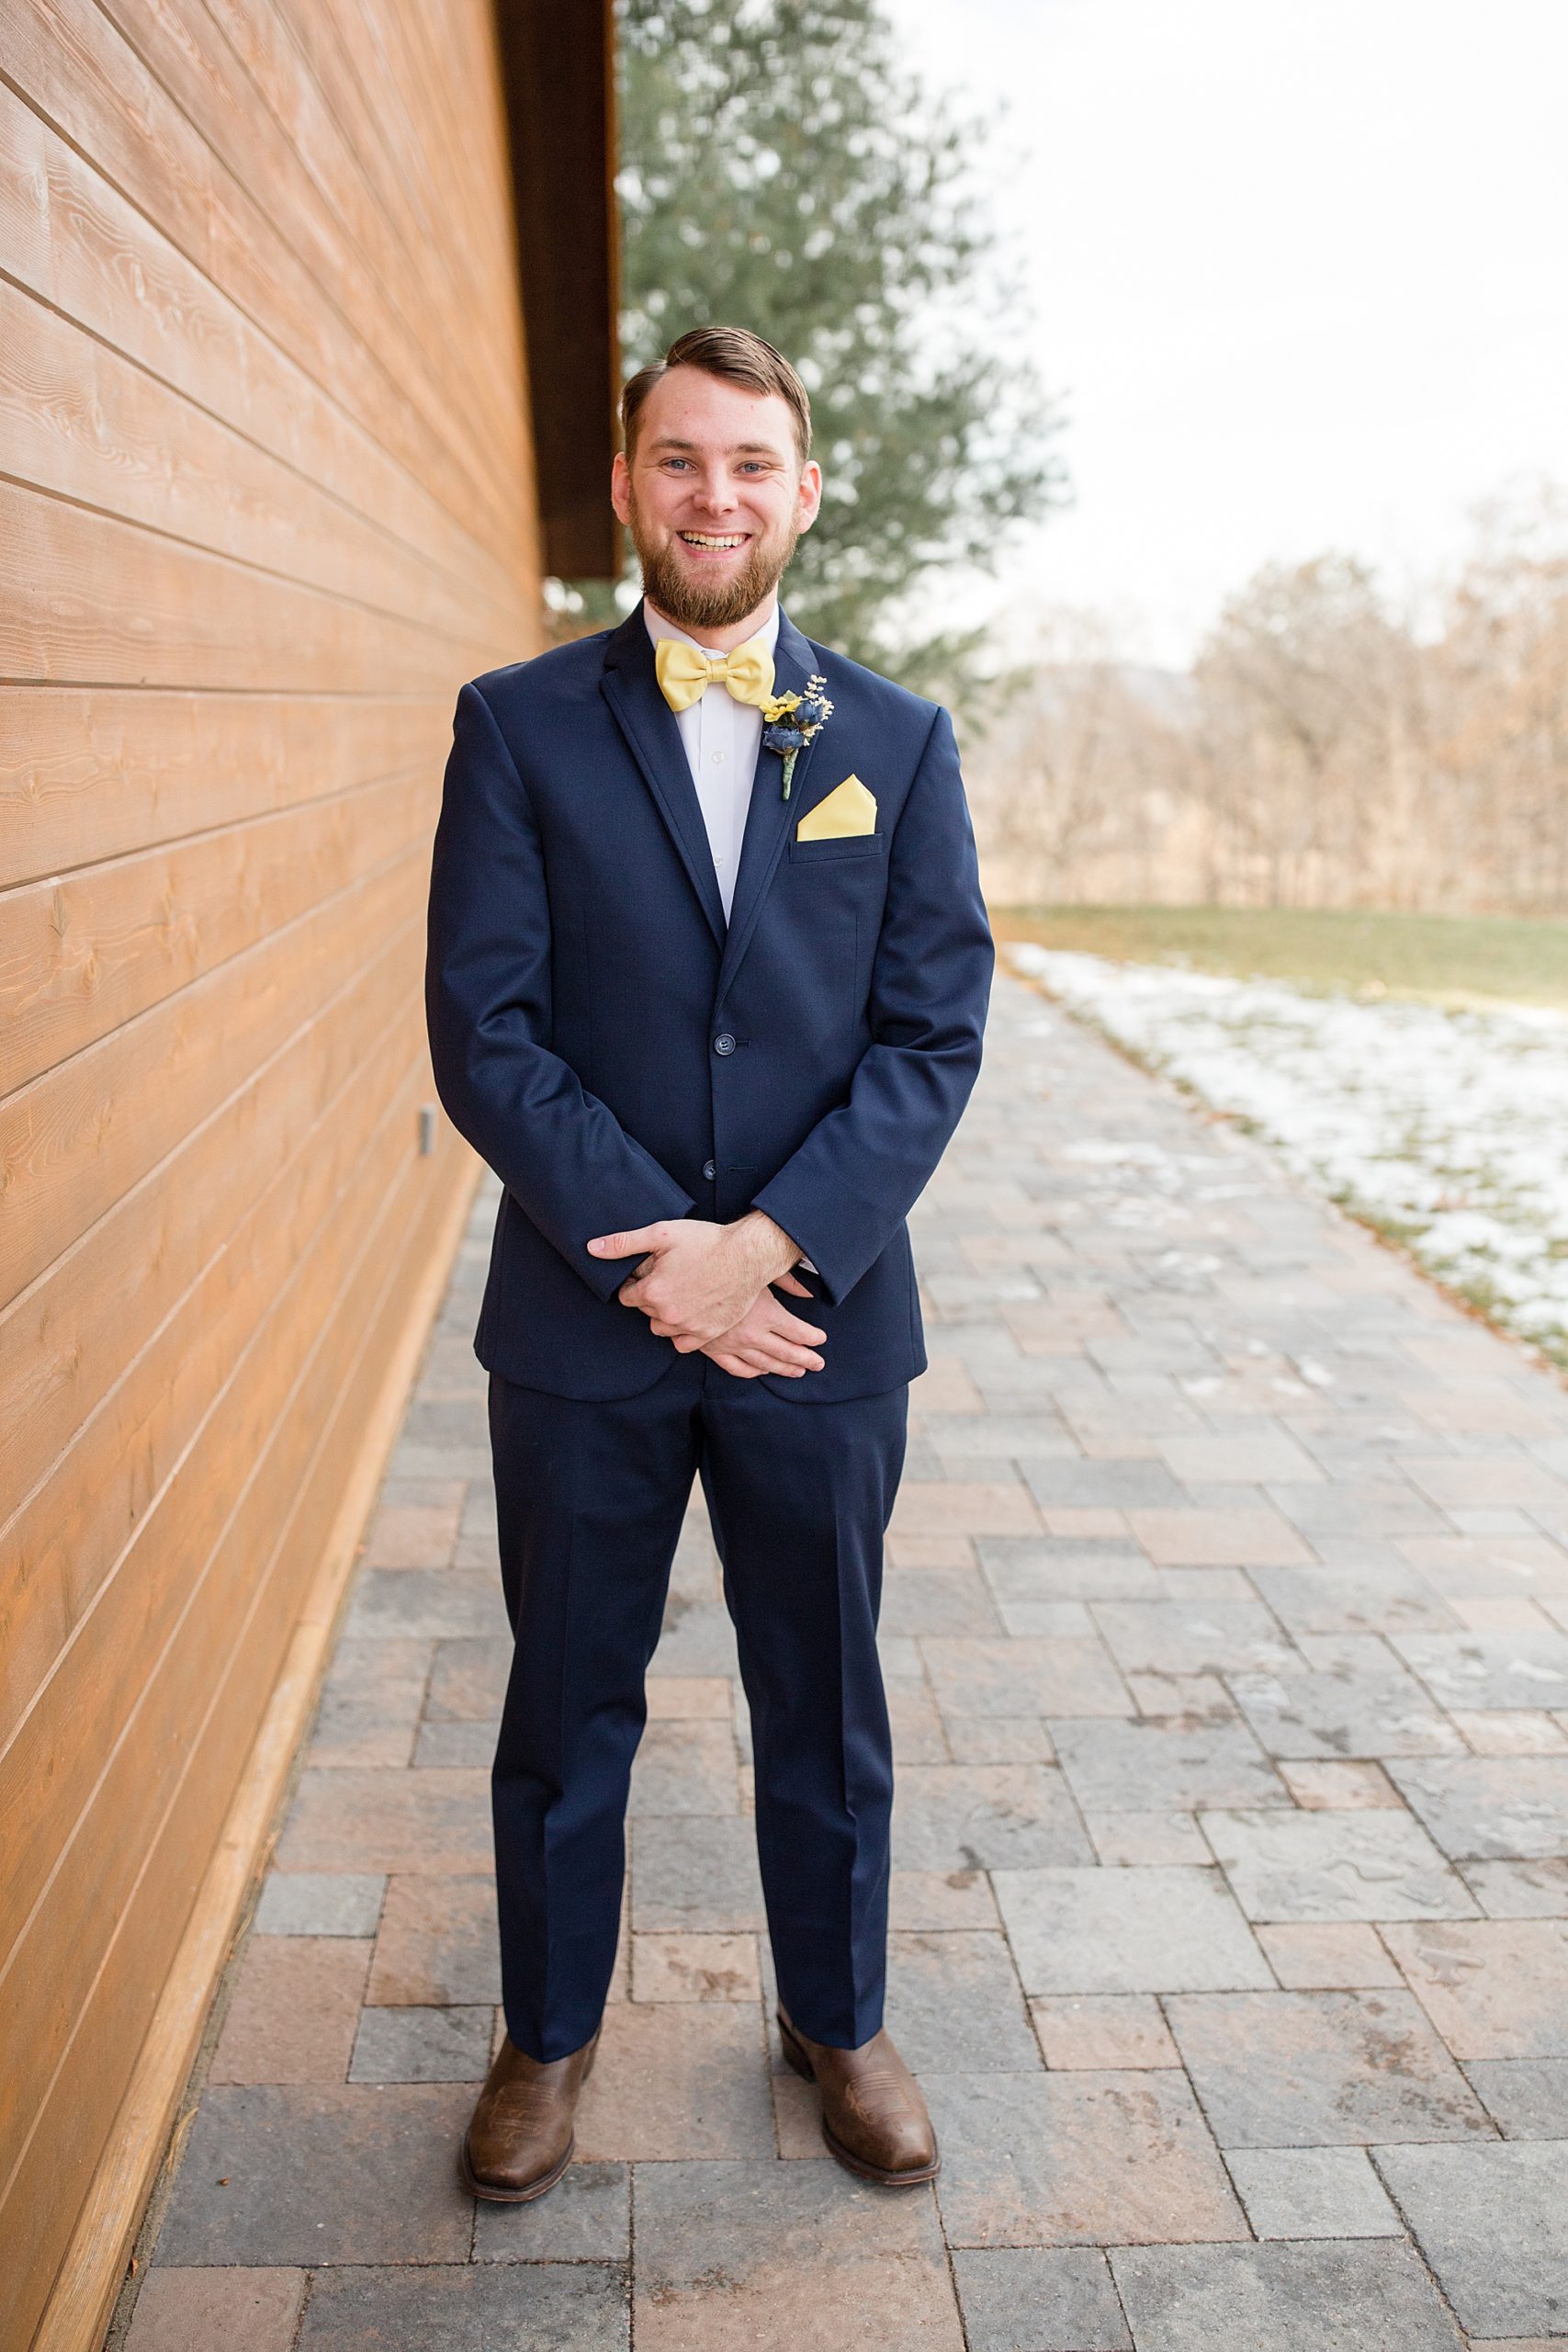 groom poses with hands in front of suit